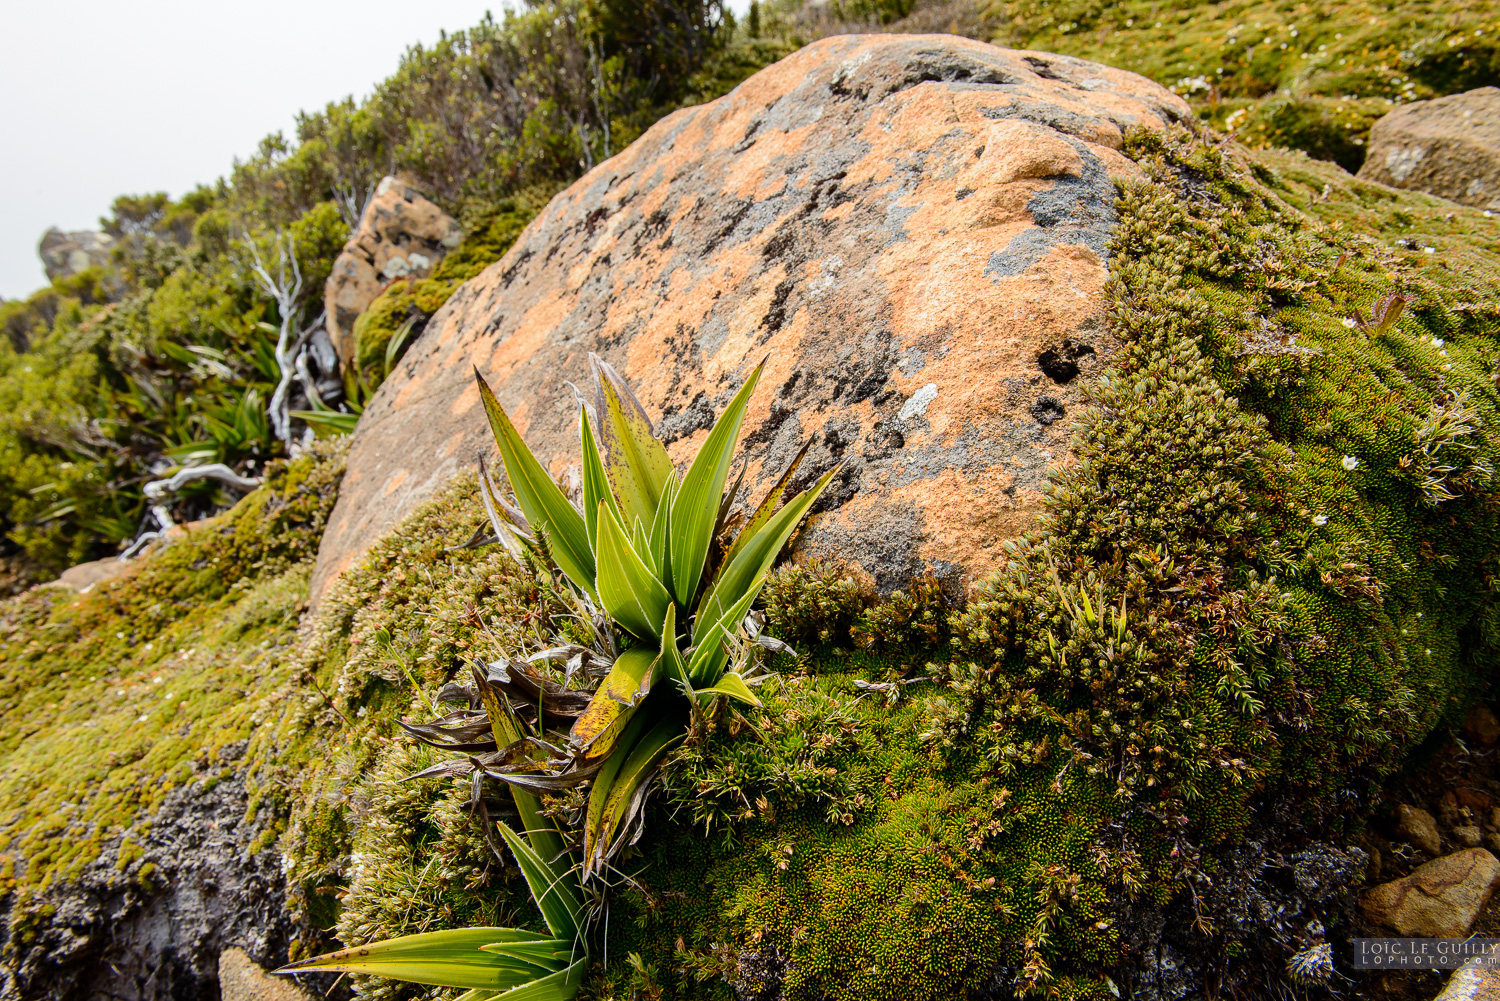 photograph of Cushion plants and rock, Hartz Mountains